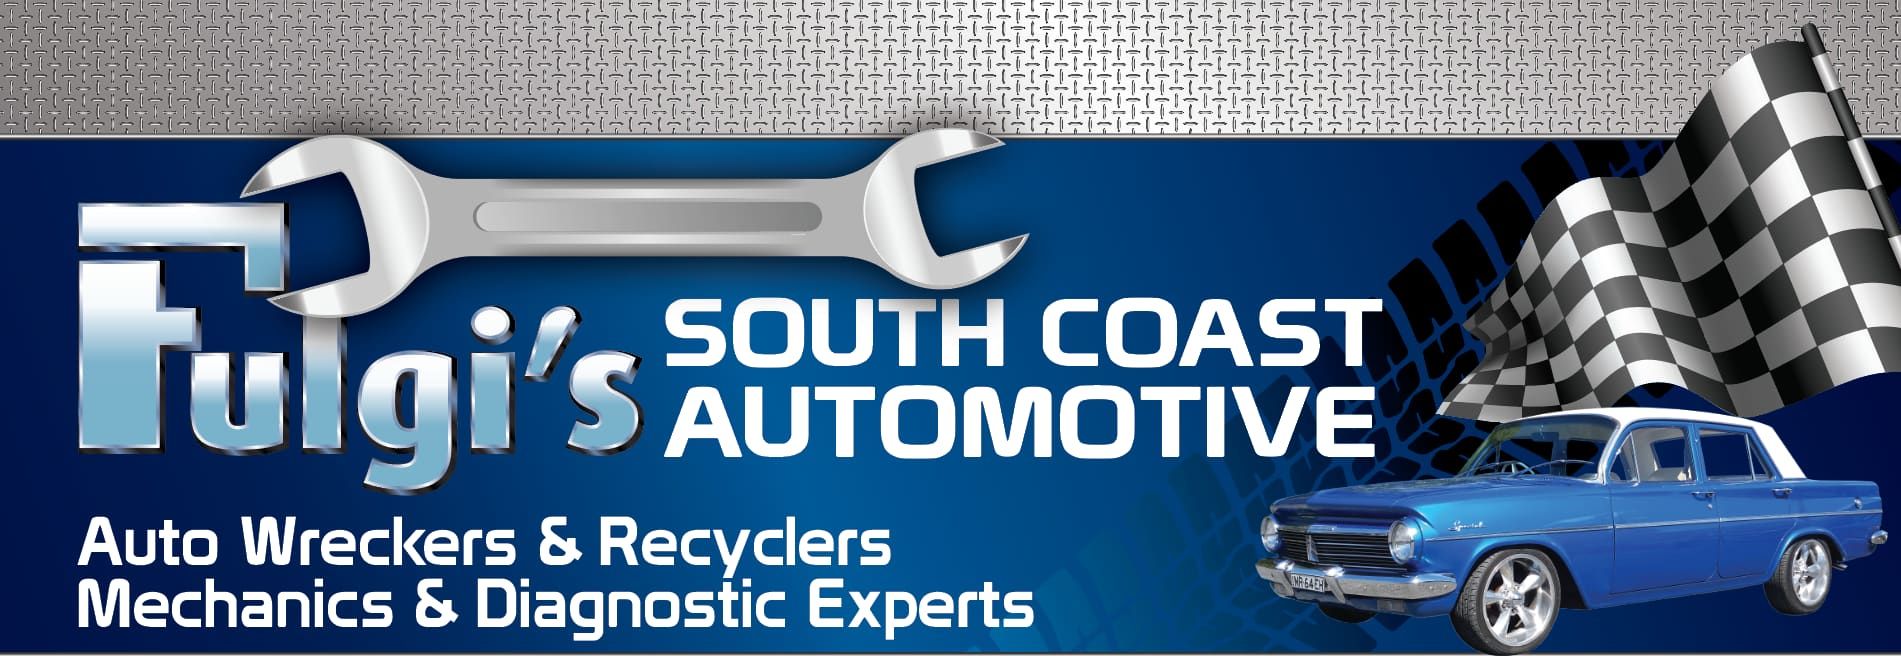 Fulgi's South Coast Automotive & Dismantling: Efficient Mechanical Repairs in Nowra